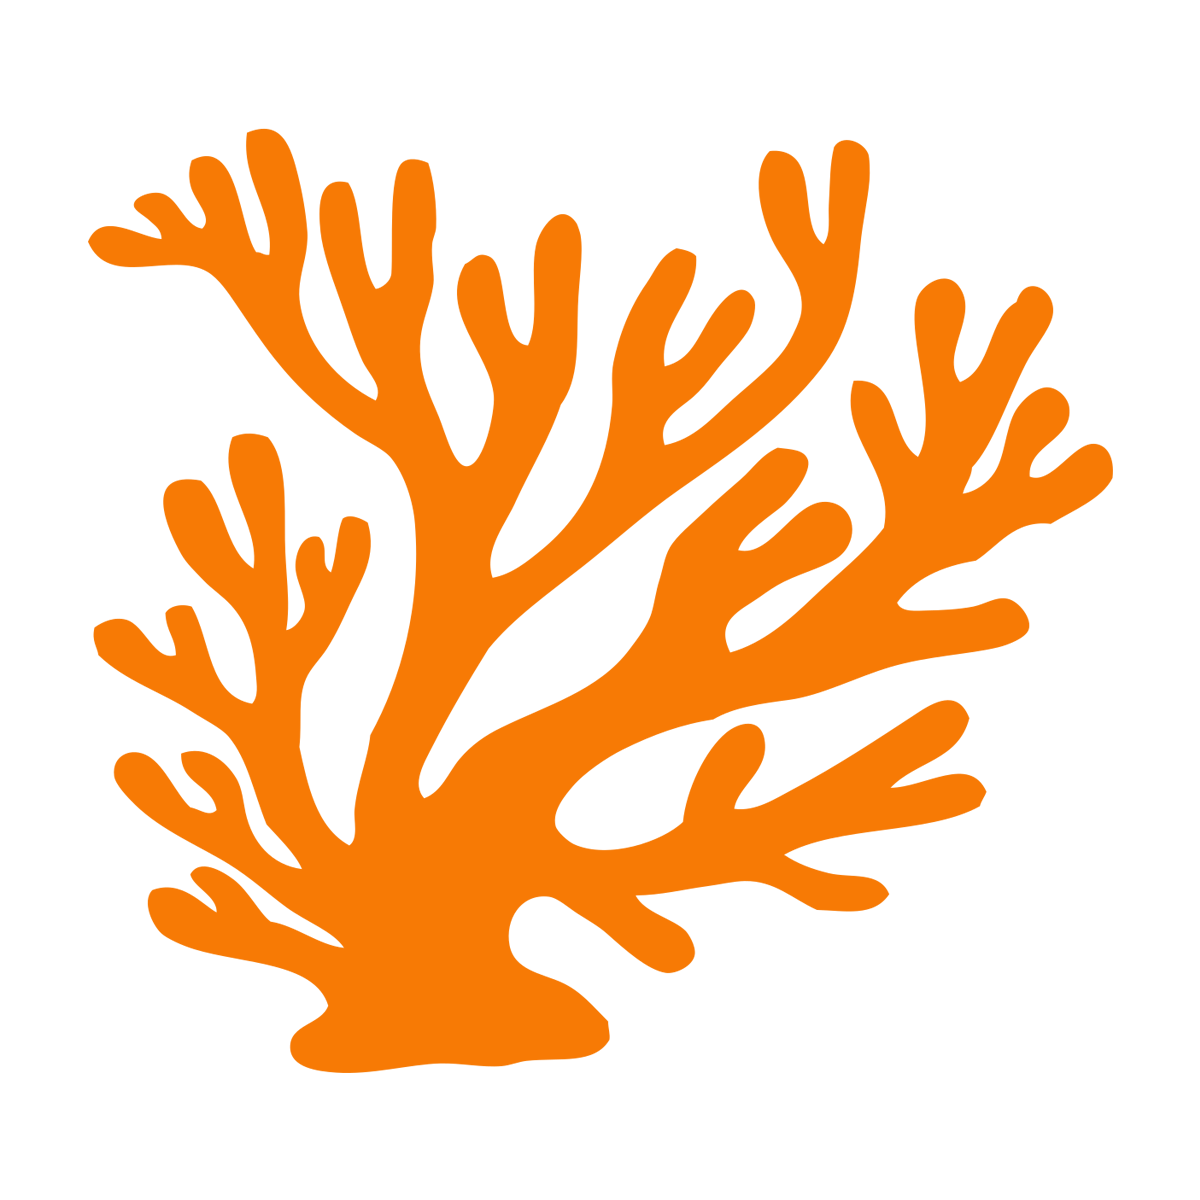 An orange icon of red seaweed